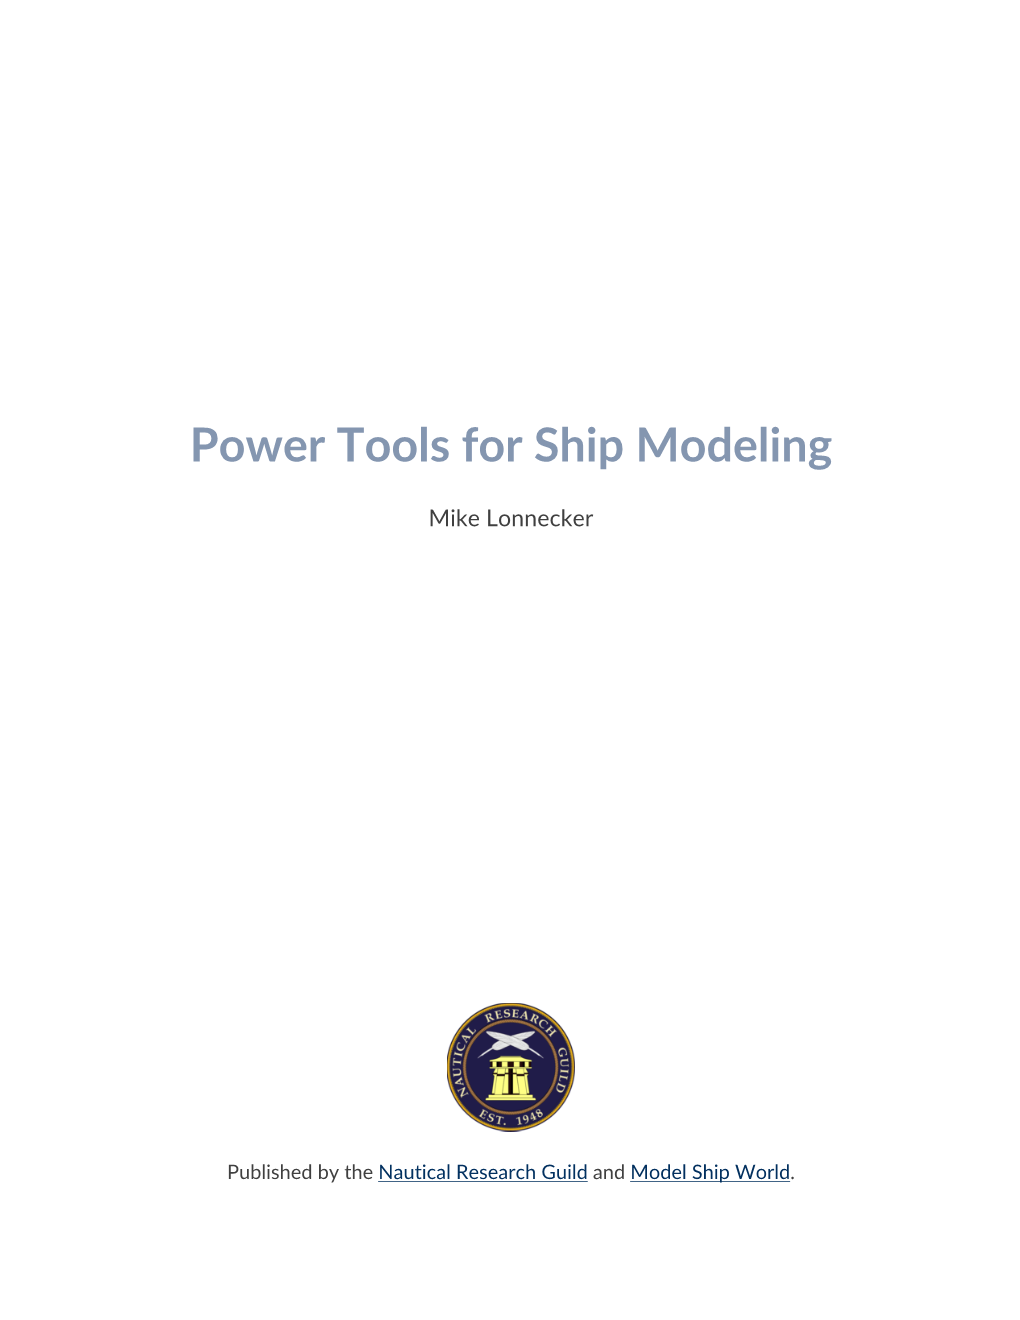 Power Tools for Ship Modeling